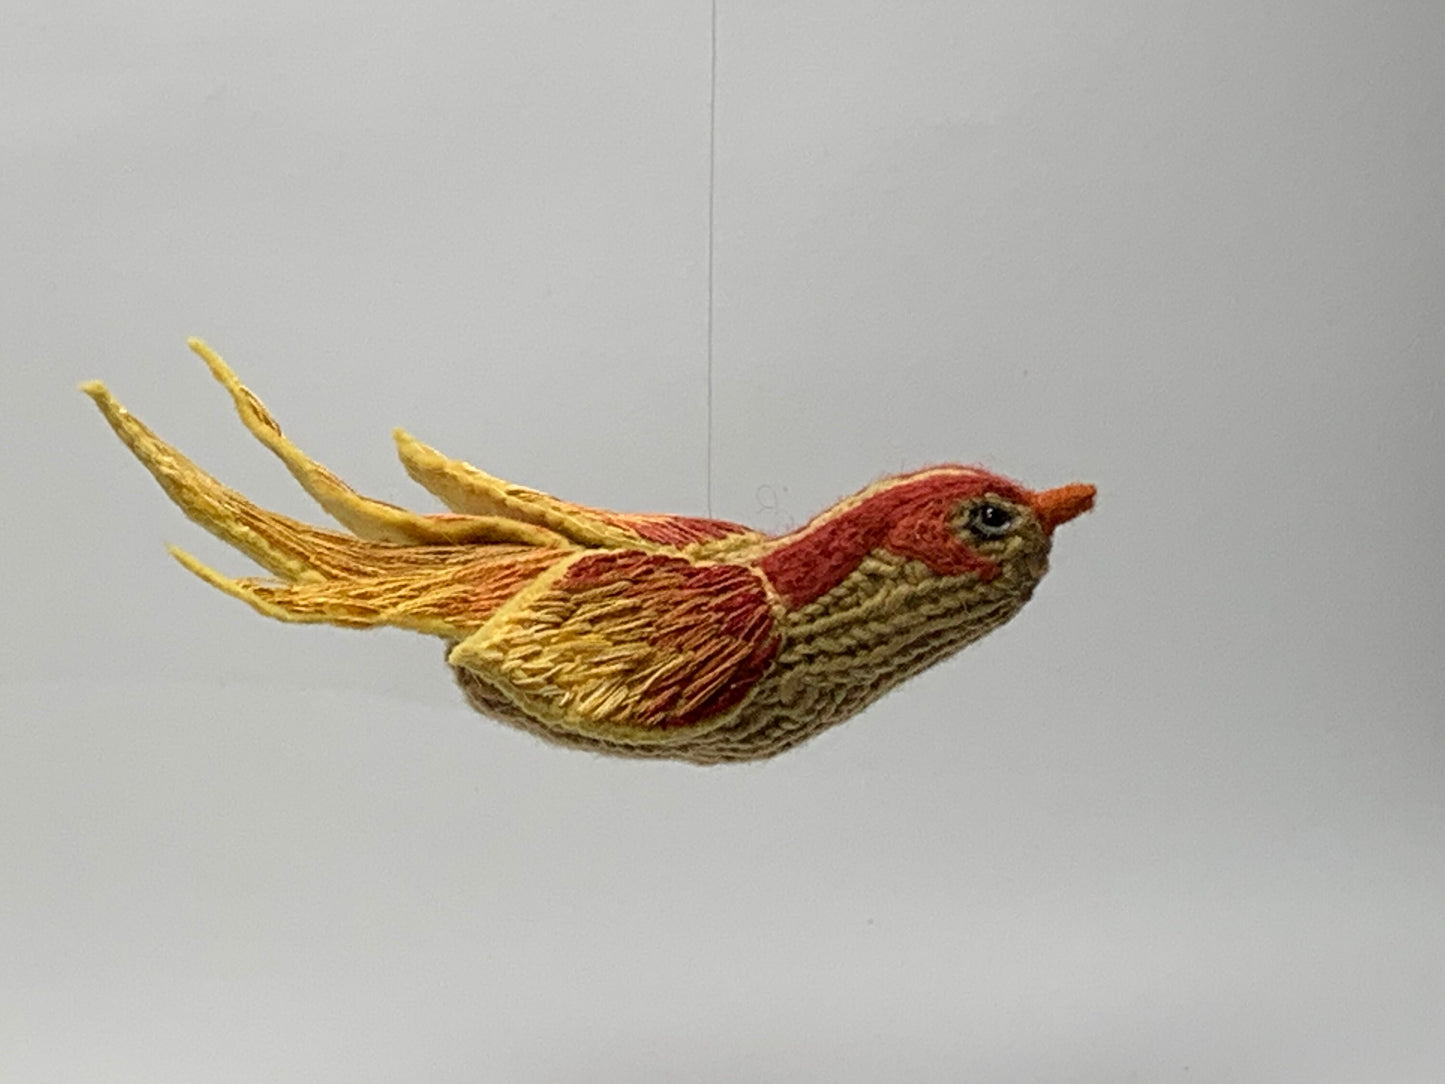 Knit and Embroidered Bird